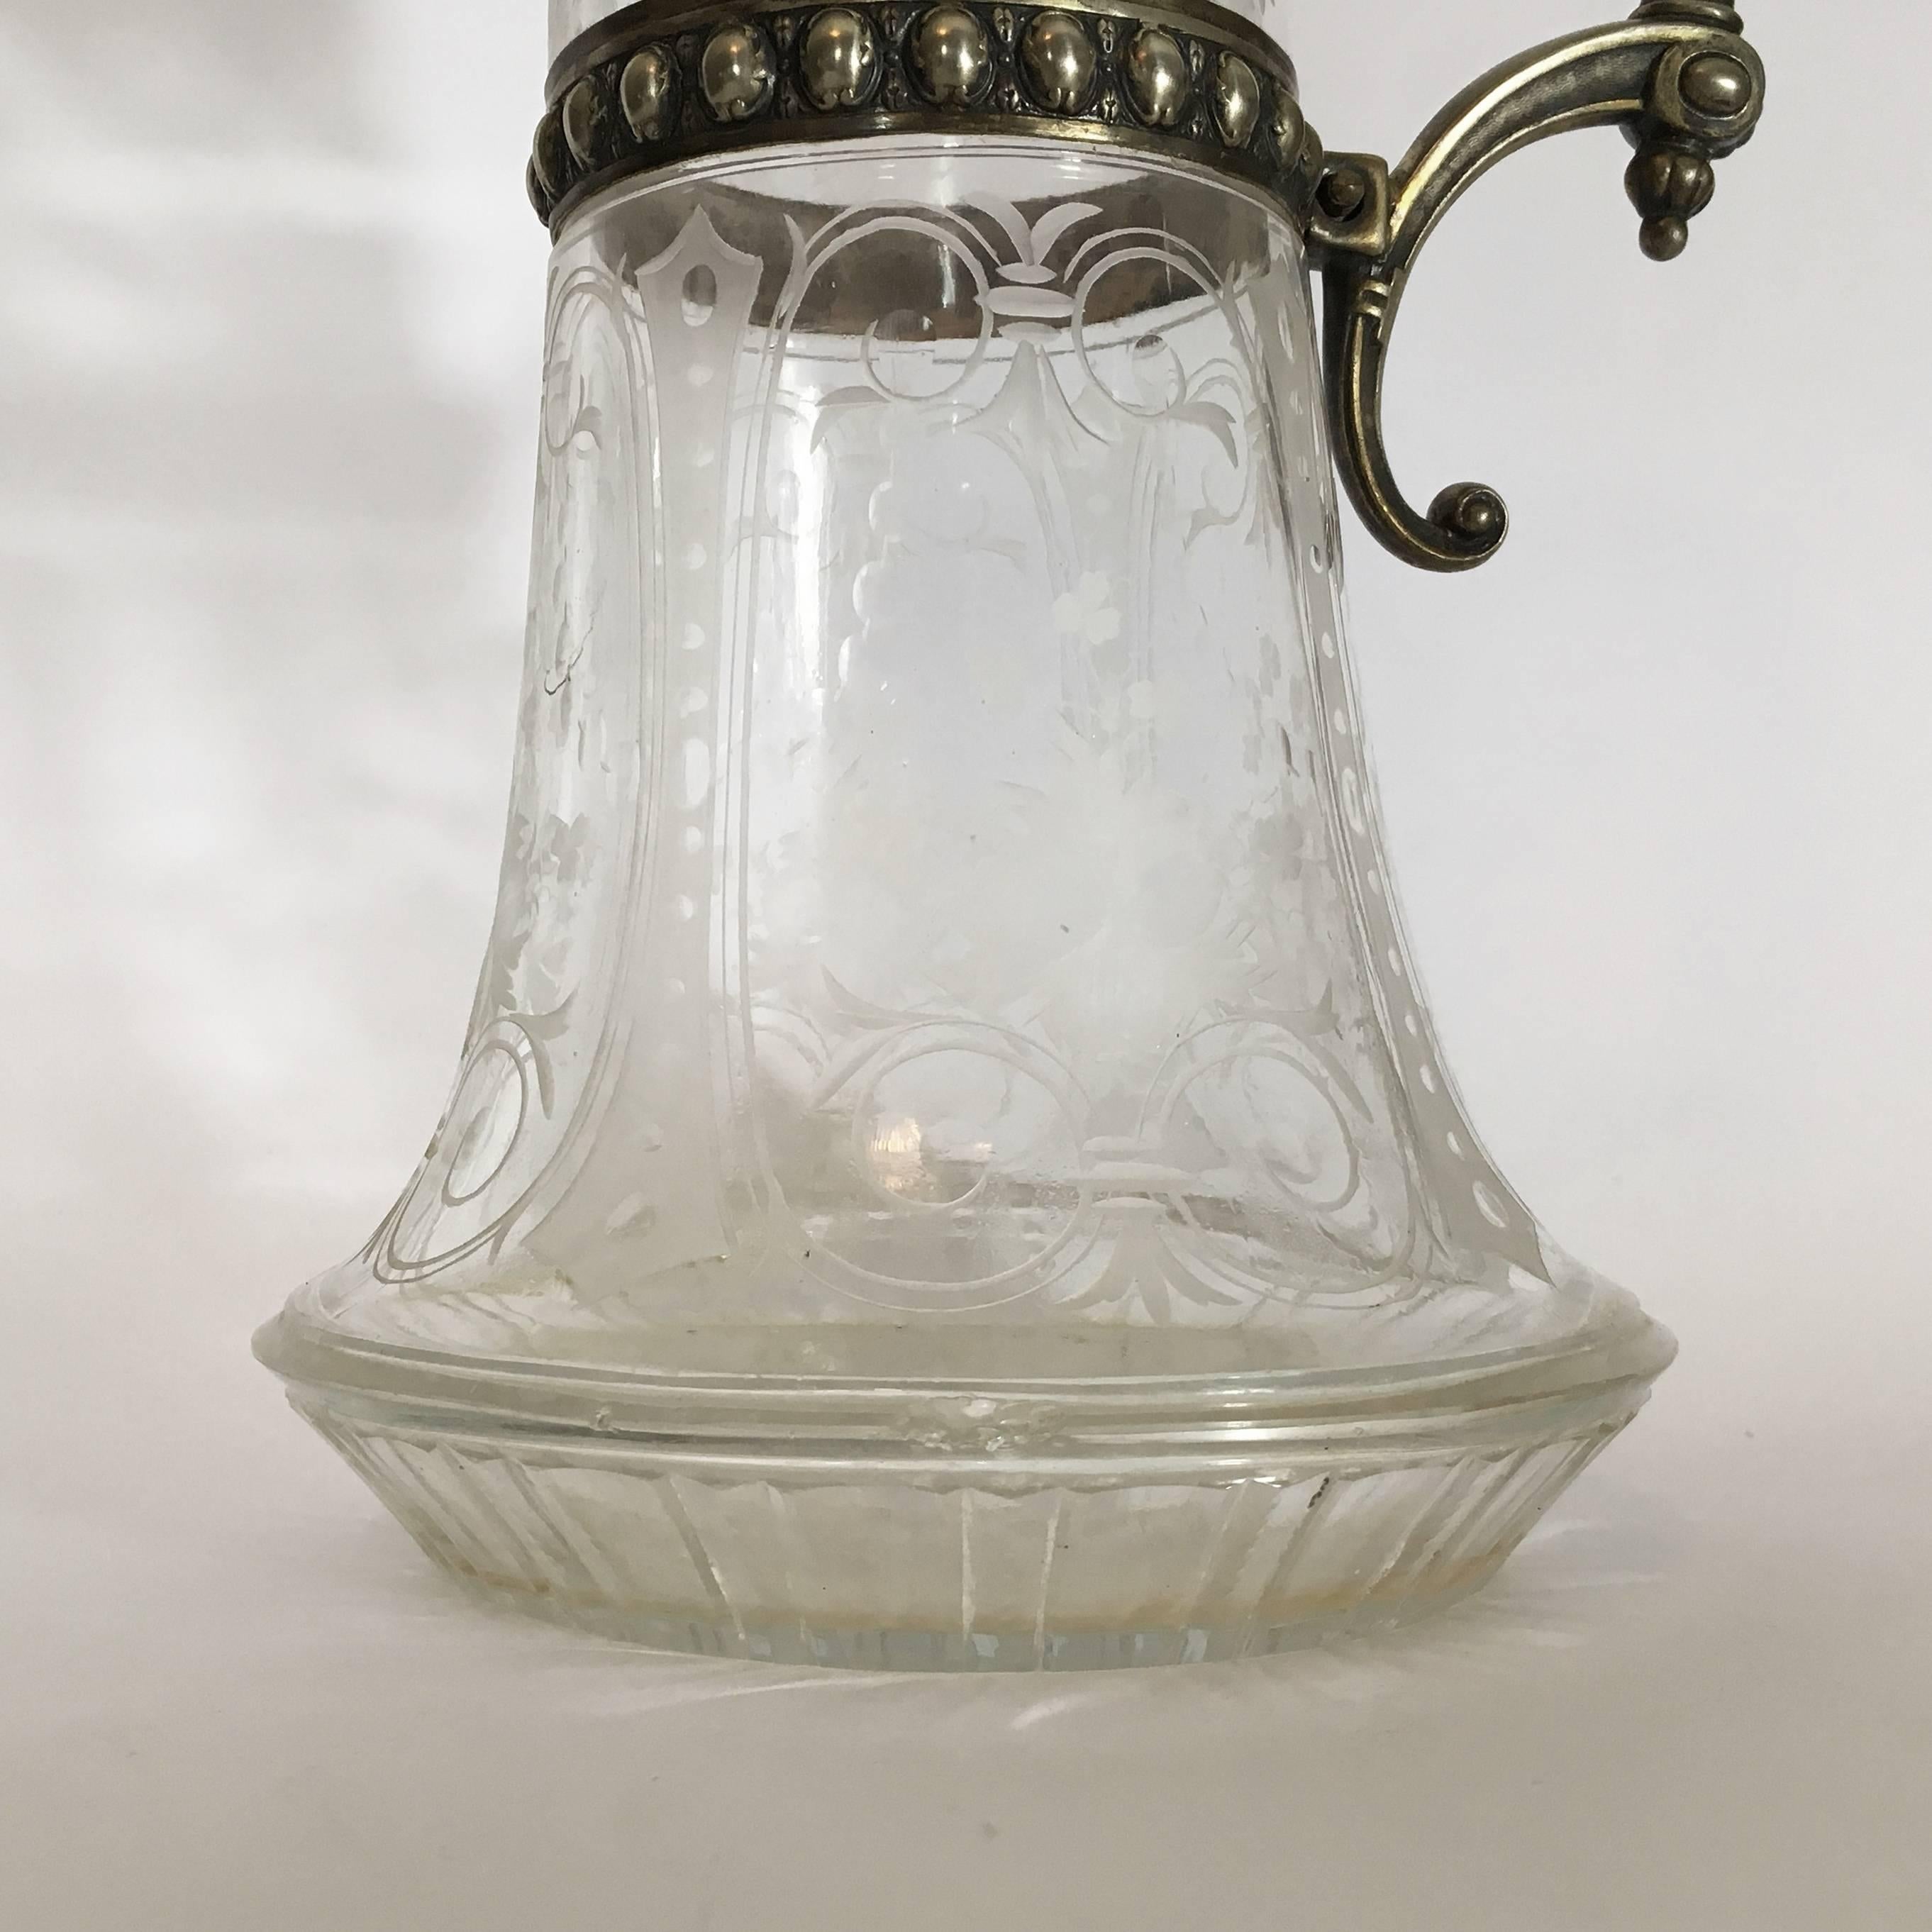 Italian Late 19th Century Engraved Glass Decanter or Carafe with Mountings For Sale 2